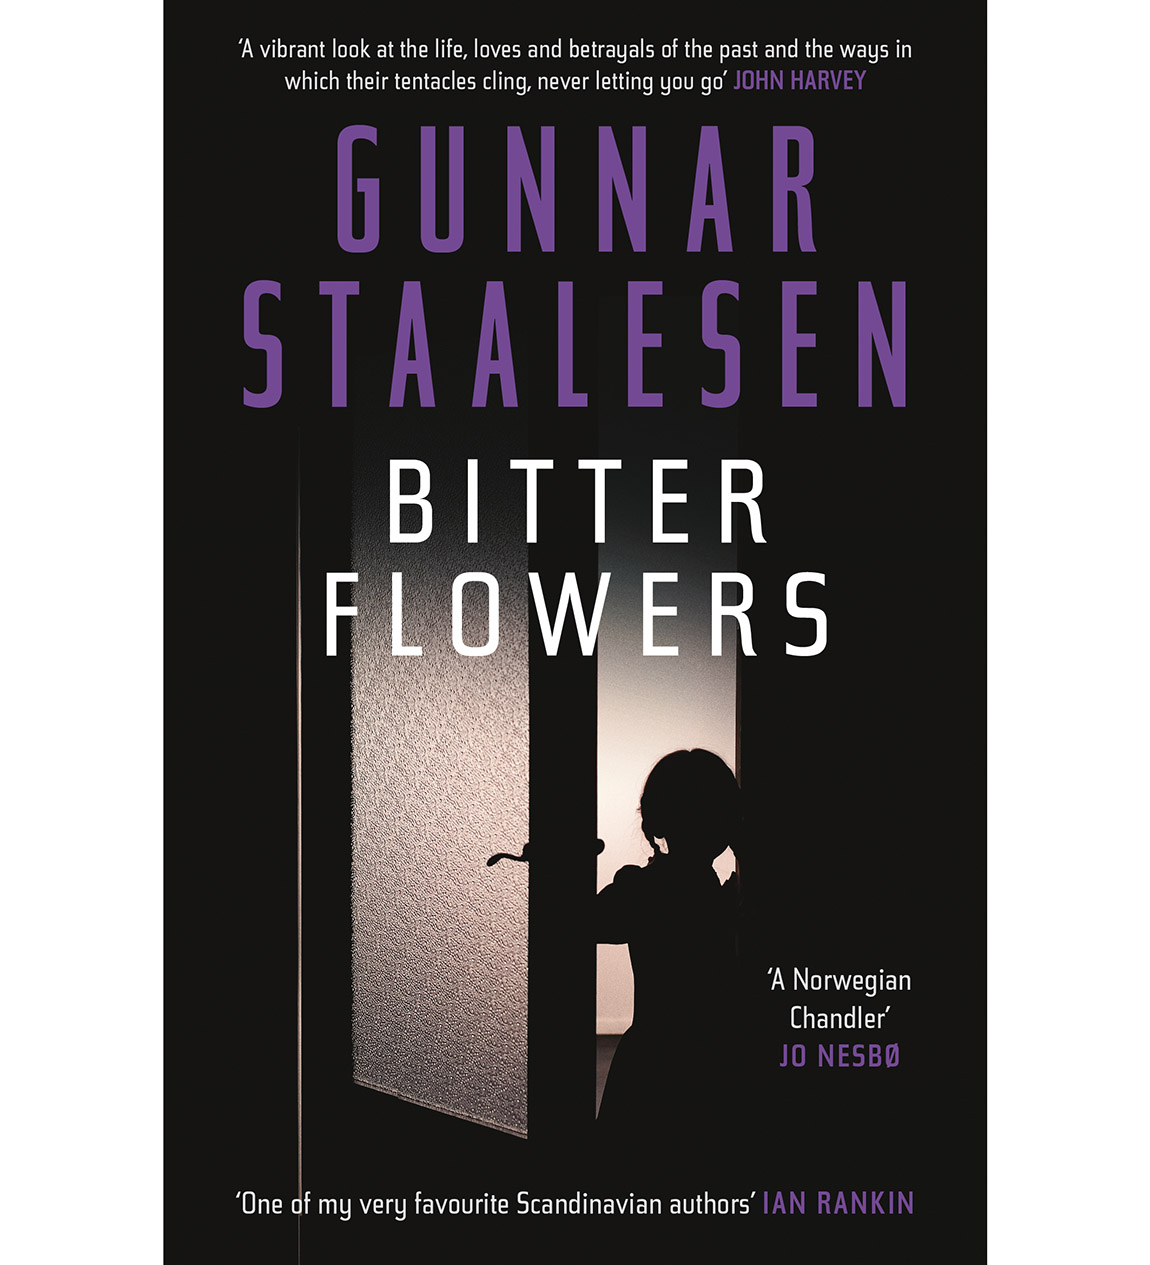 Gunnar Staalesen: The grandfather of Nordic Noir on environmental thrillers, his love of Bergen, and his hopes for planet Earth